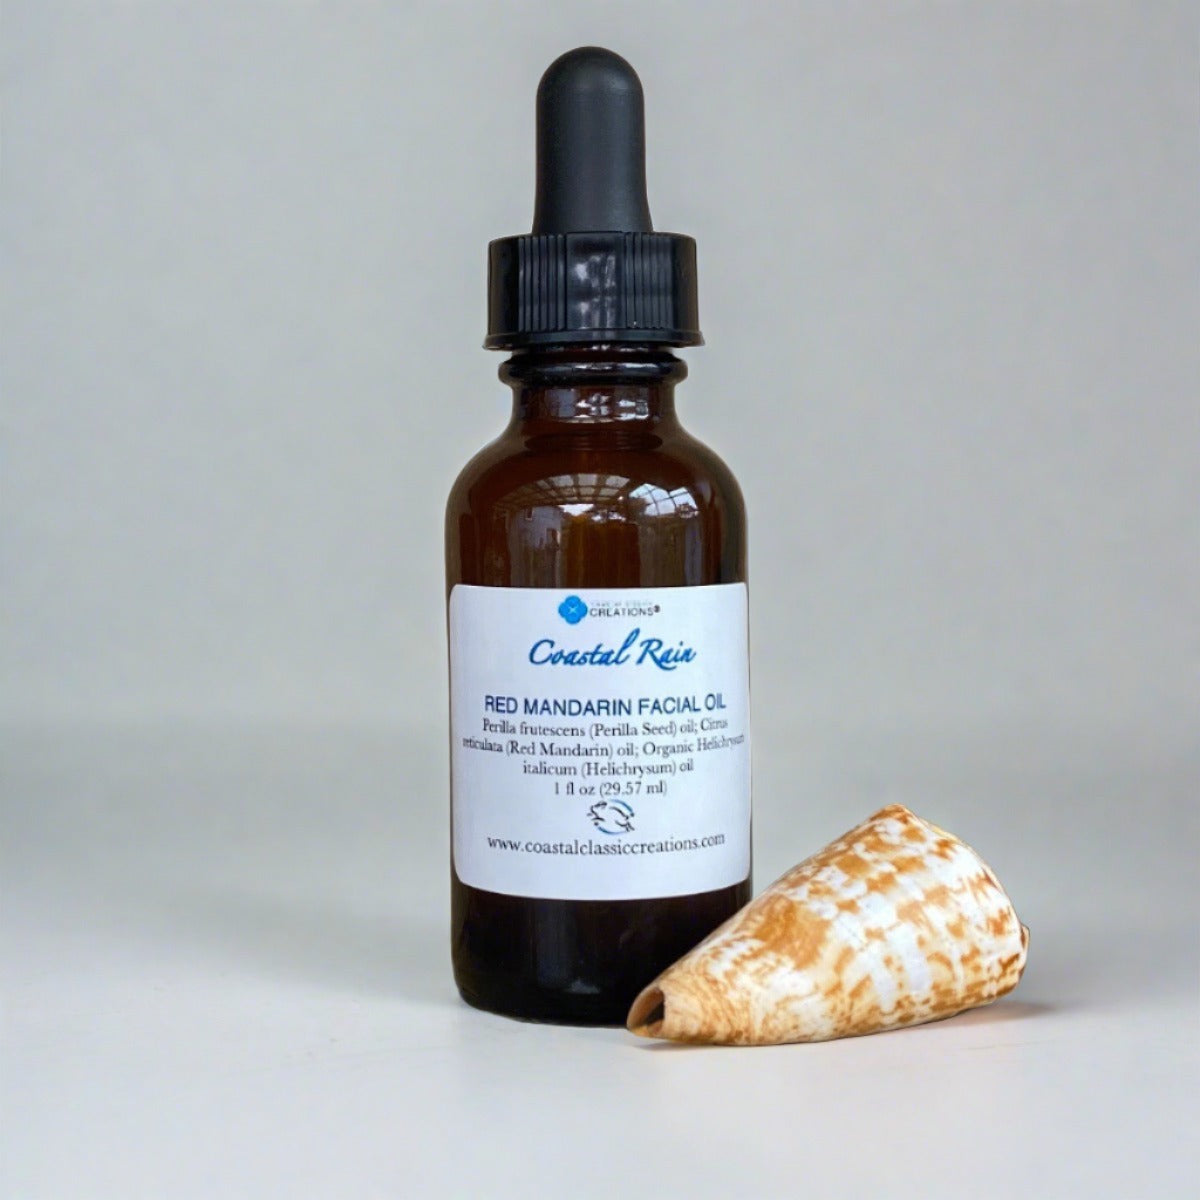 Bottle of red mandarin facial oil as a natural solution for rosacea and dermatits